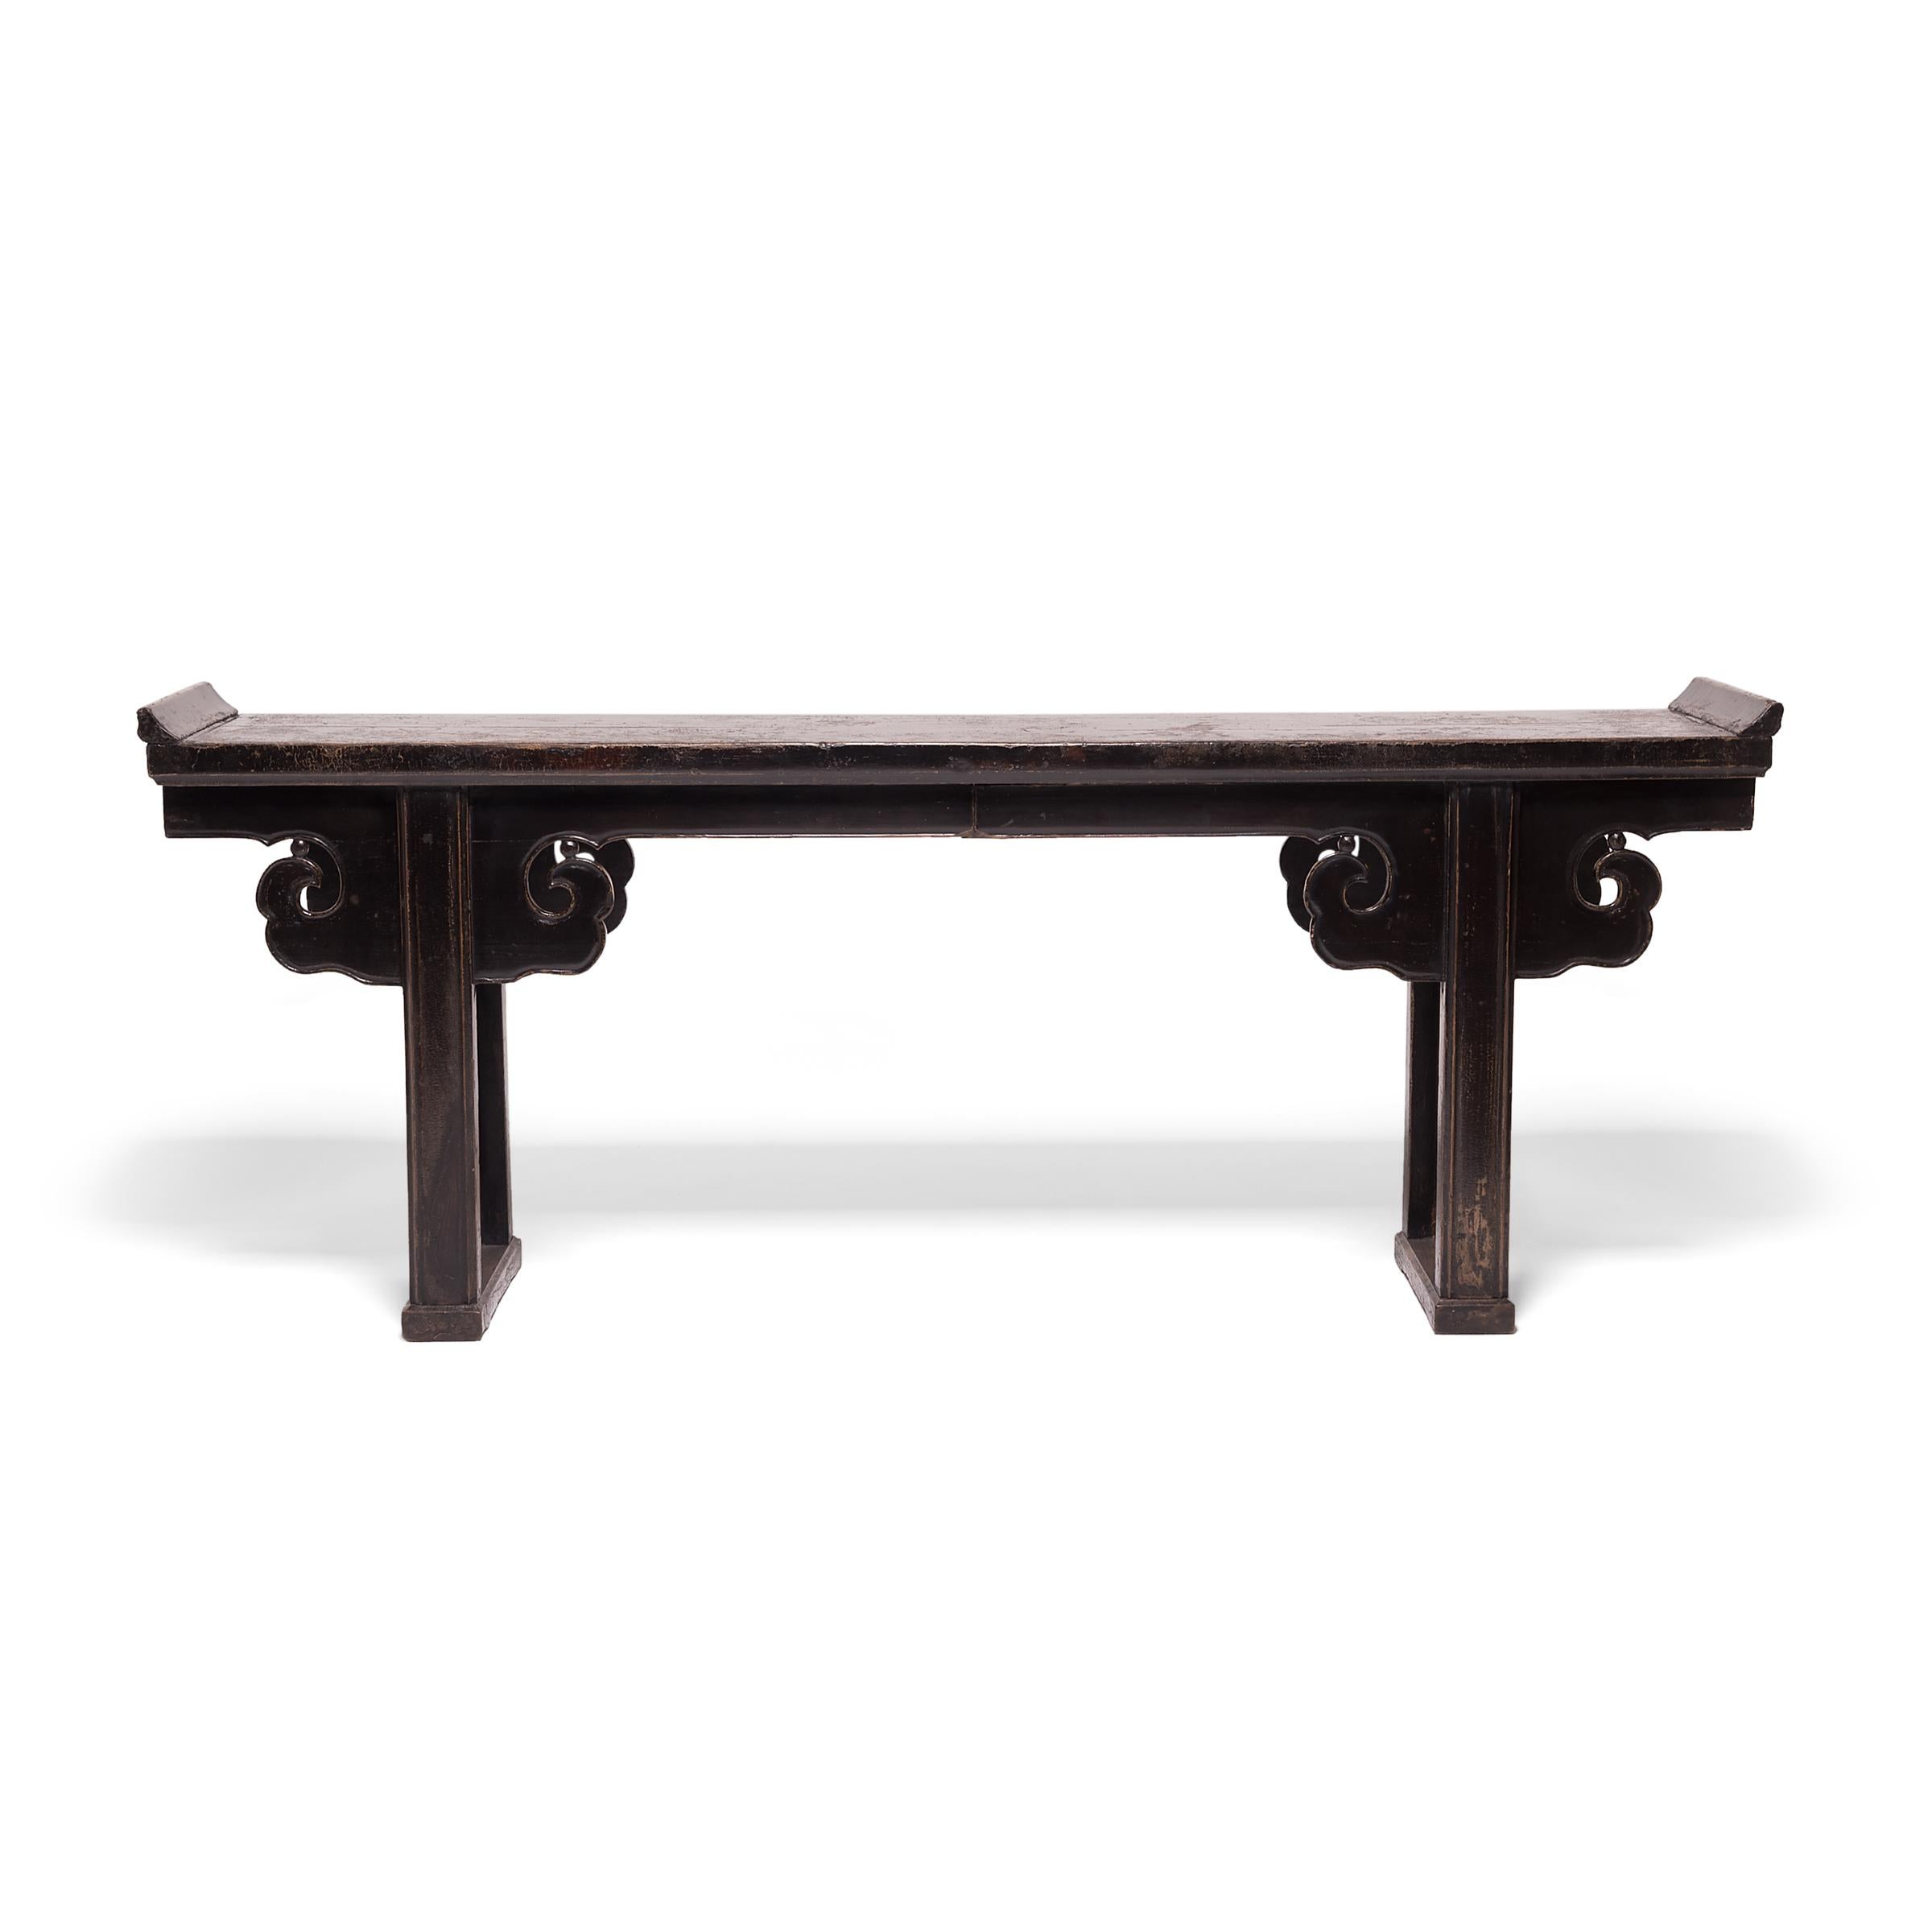 Created in China's Shanxi province in the early 19th century, this impressive altar table with everted ends features straight legs joined with a base stretcher, topped by hand carved spandrels resembling billowing clouds. Constructed with